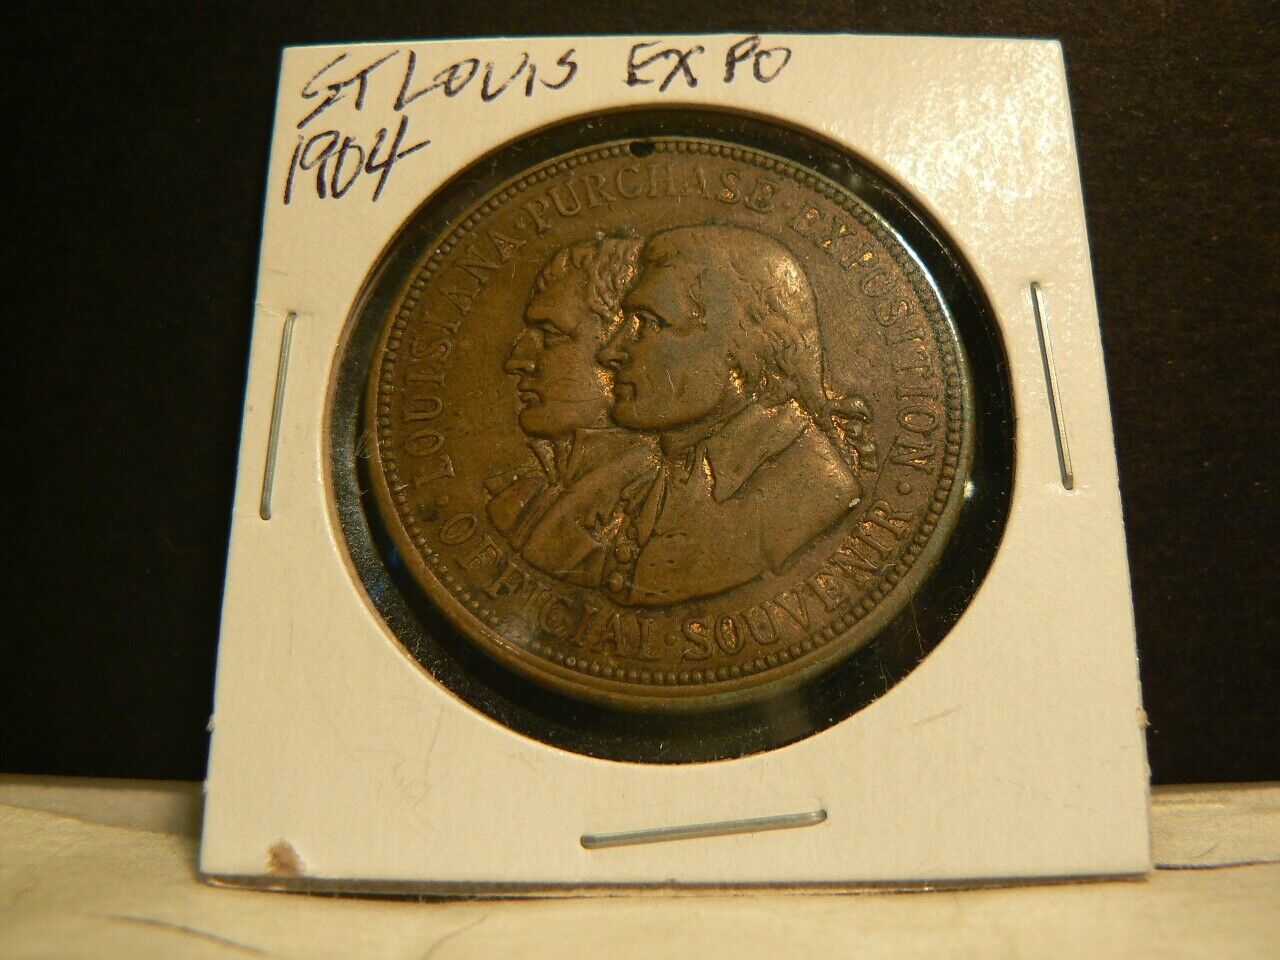 1904 Large Bronze St. Louis Louisiana Purchase Exposition Medal